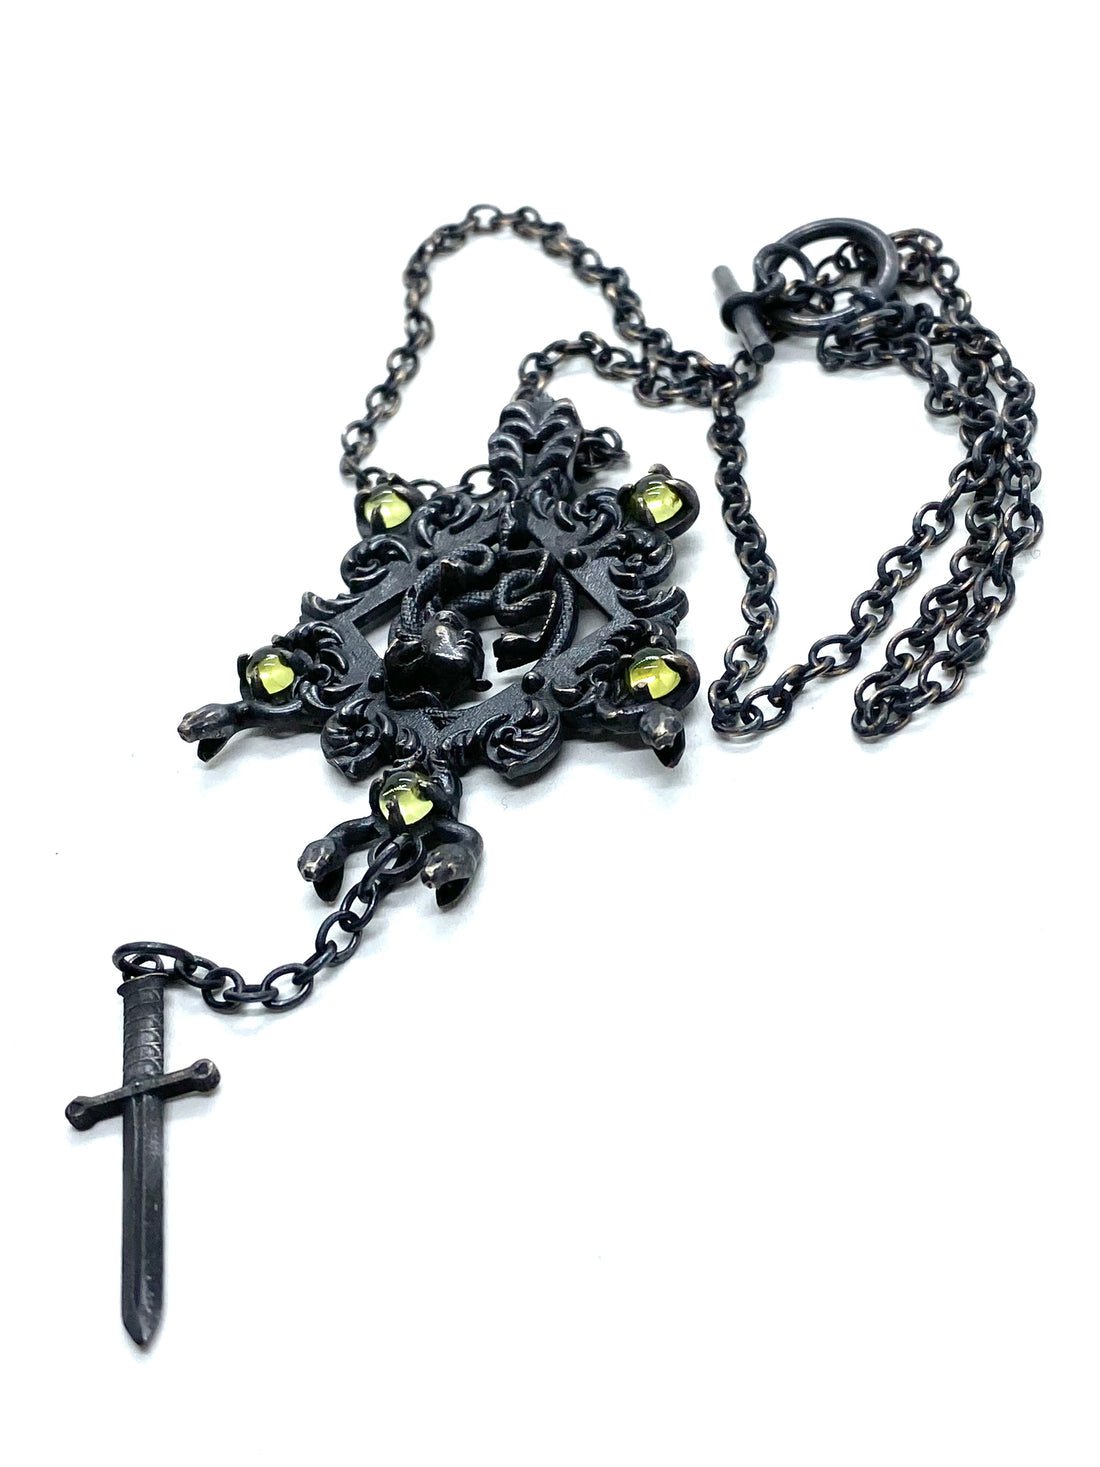 Medusa Shrine Necklace in Bronze and Peridot - Nocturne LLC